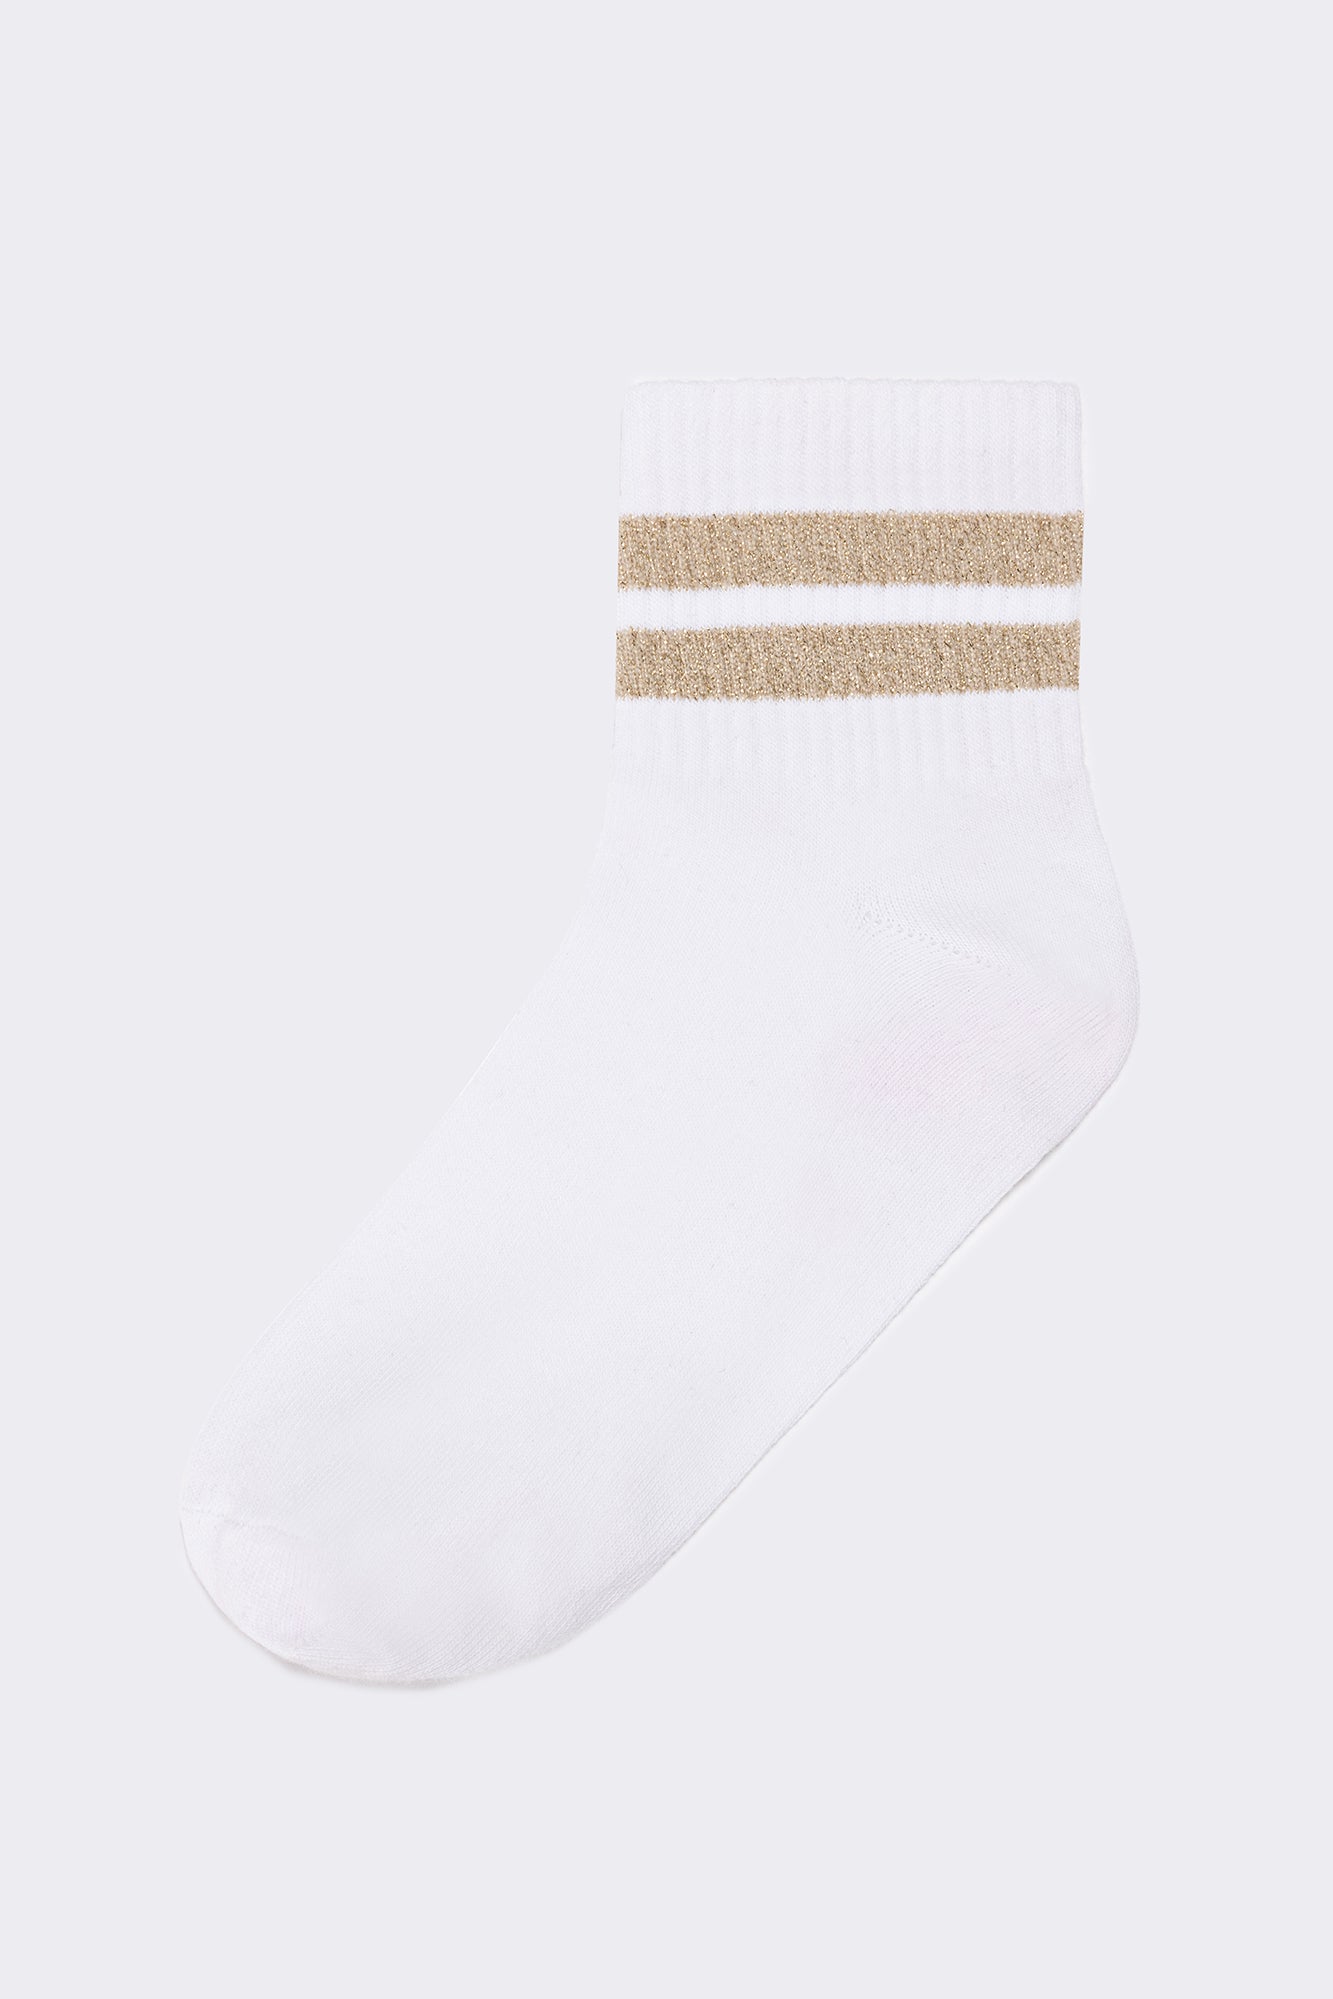 A wholesale clothing model wears Striped Socks - White & Gold, Turkish wholesale Socks of Touche Prive